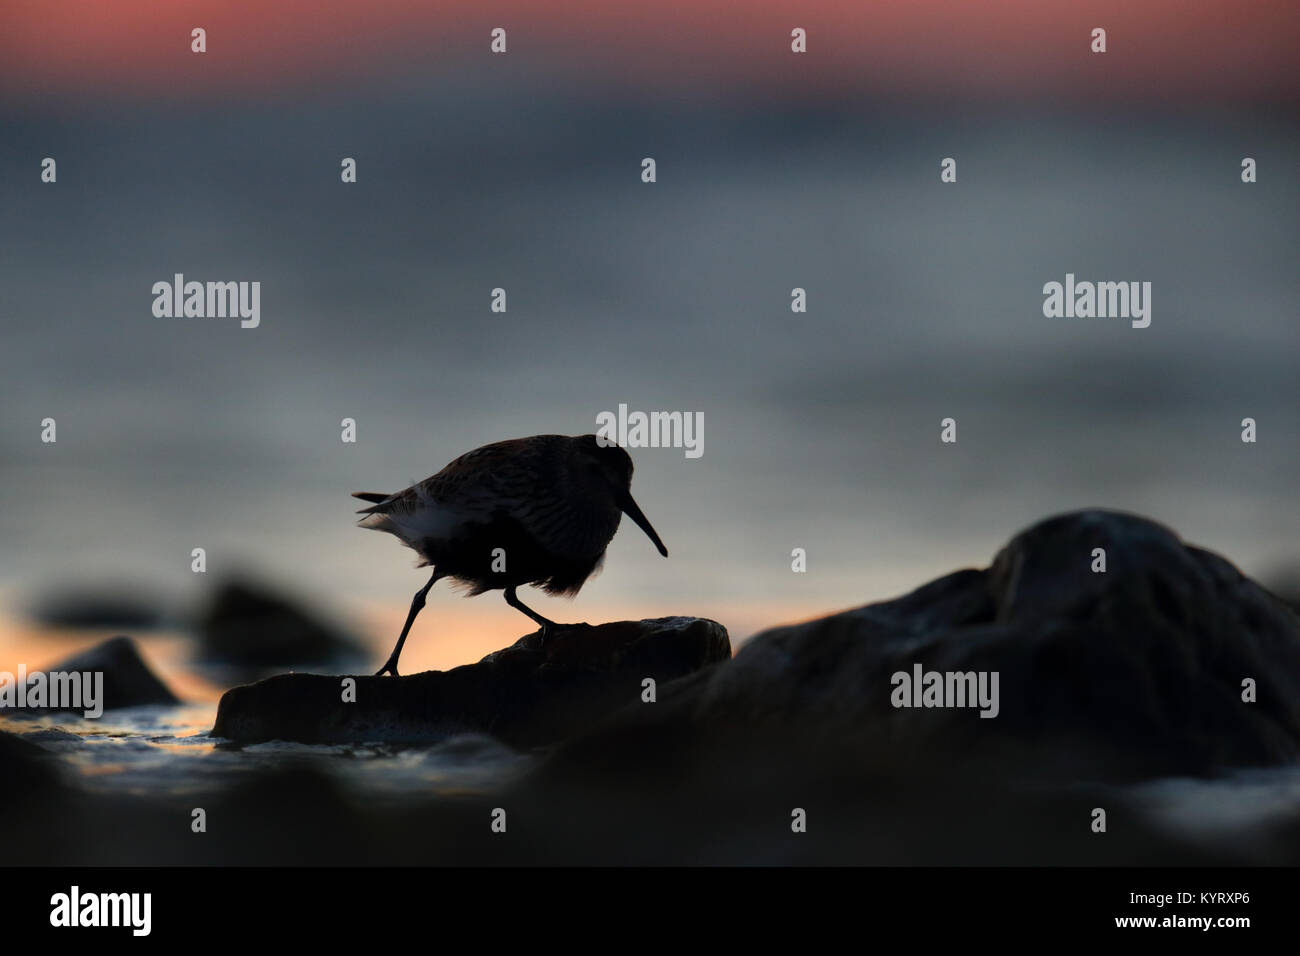 Silhouette of Dunlin (Calidris alpina) by the coast at sunset. Stock Photo